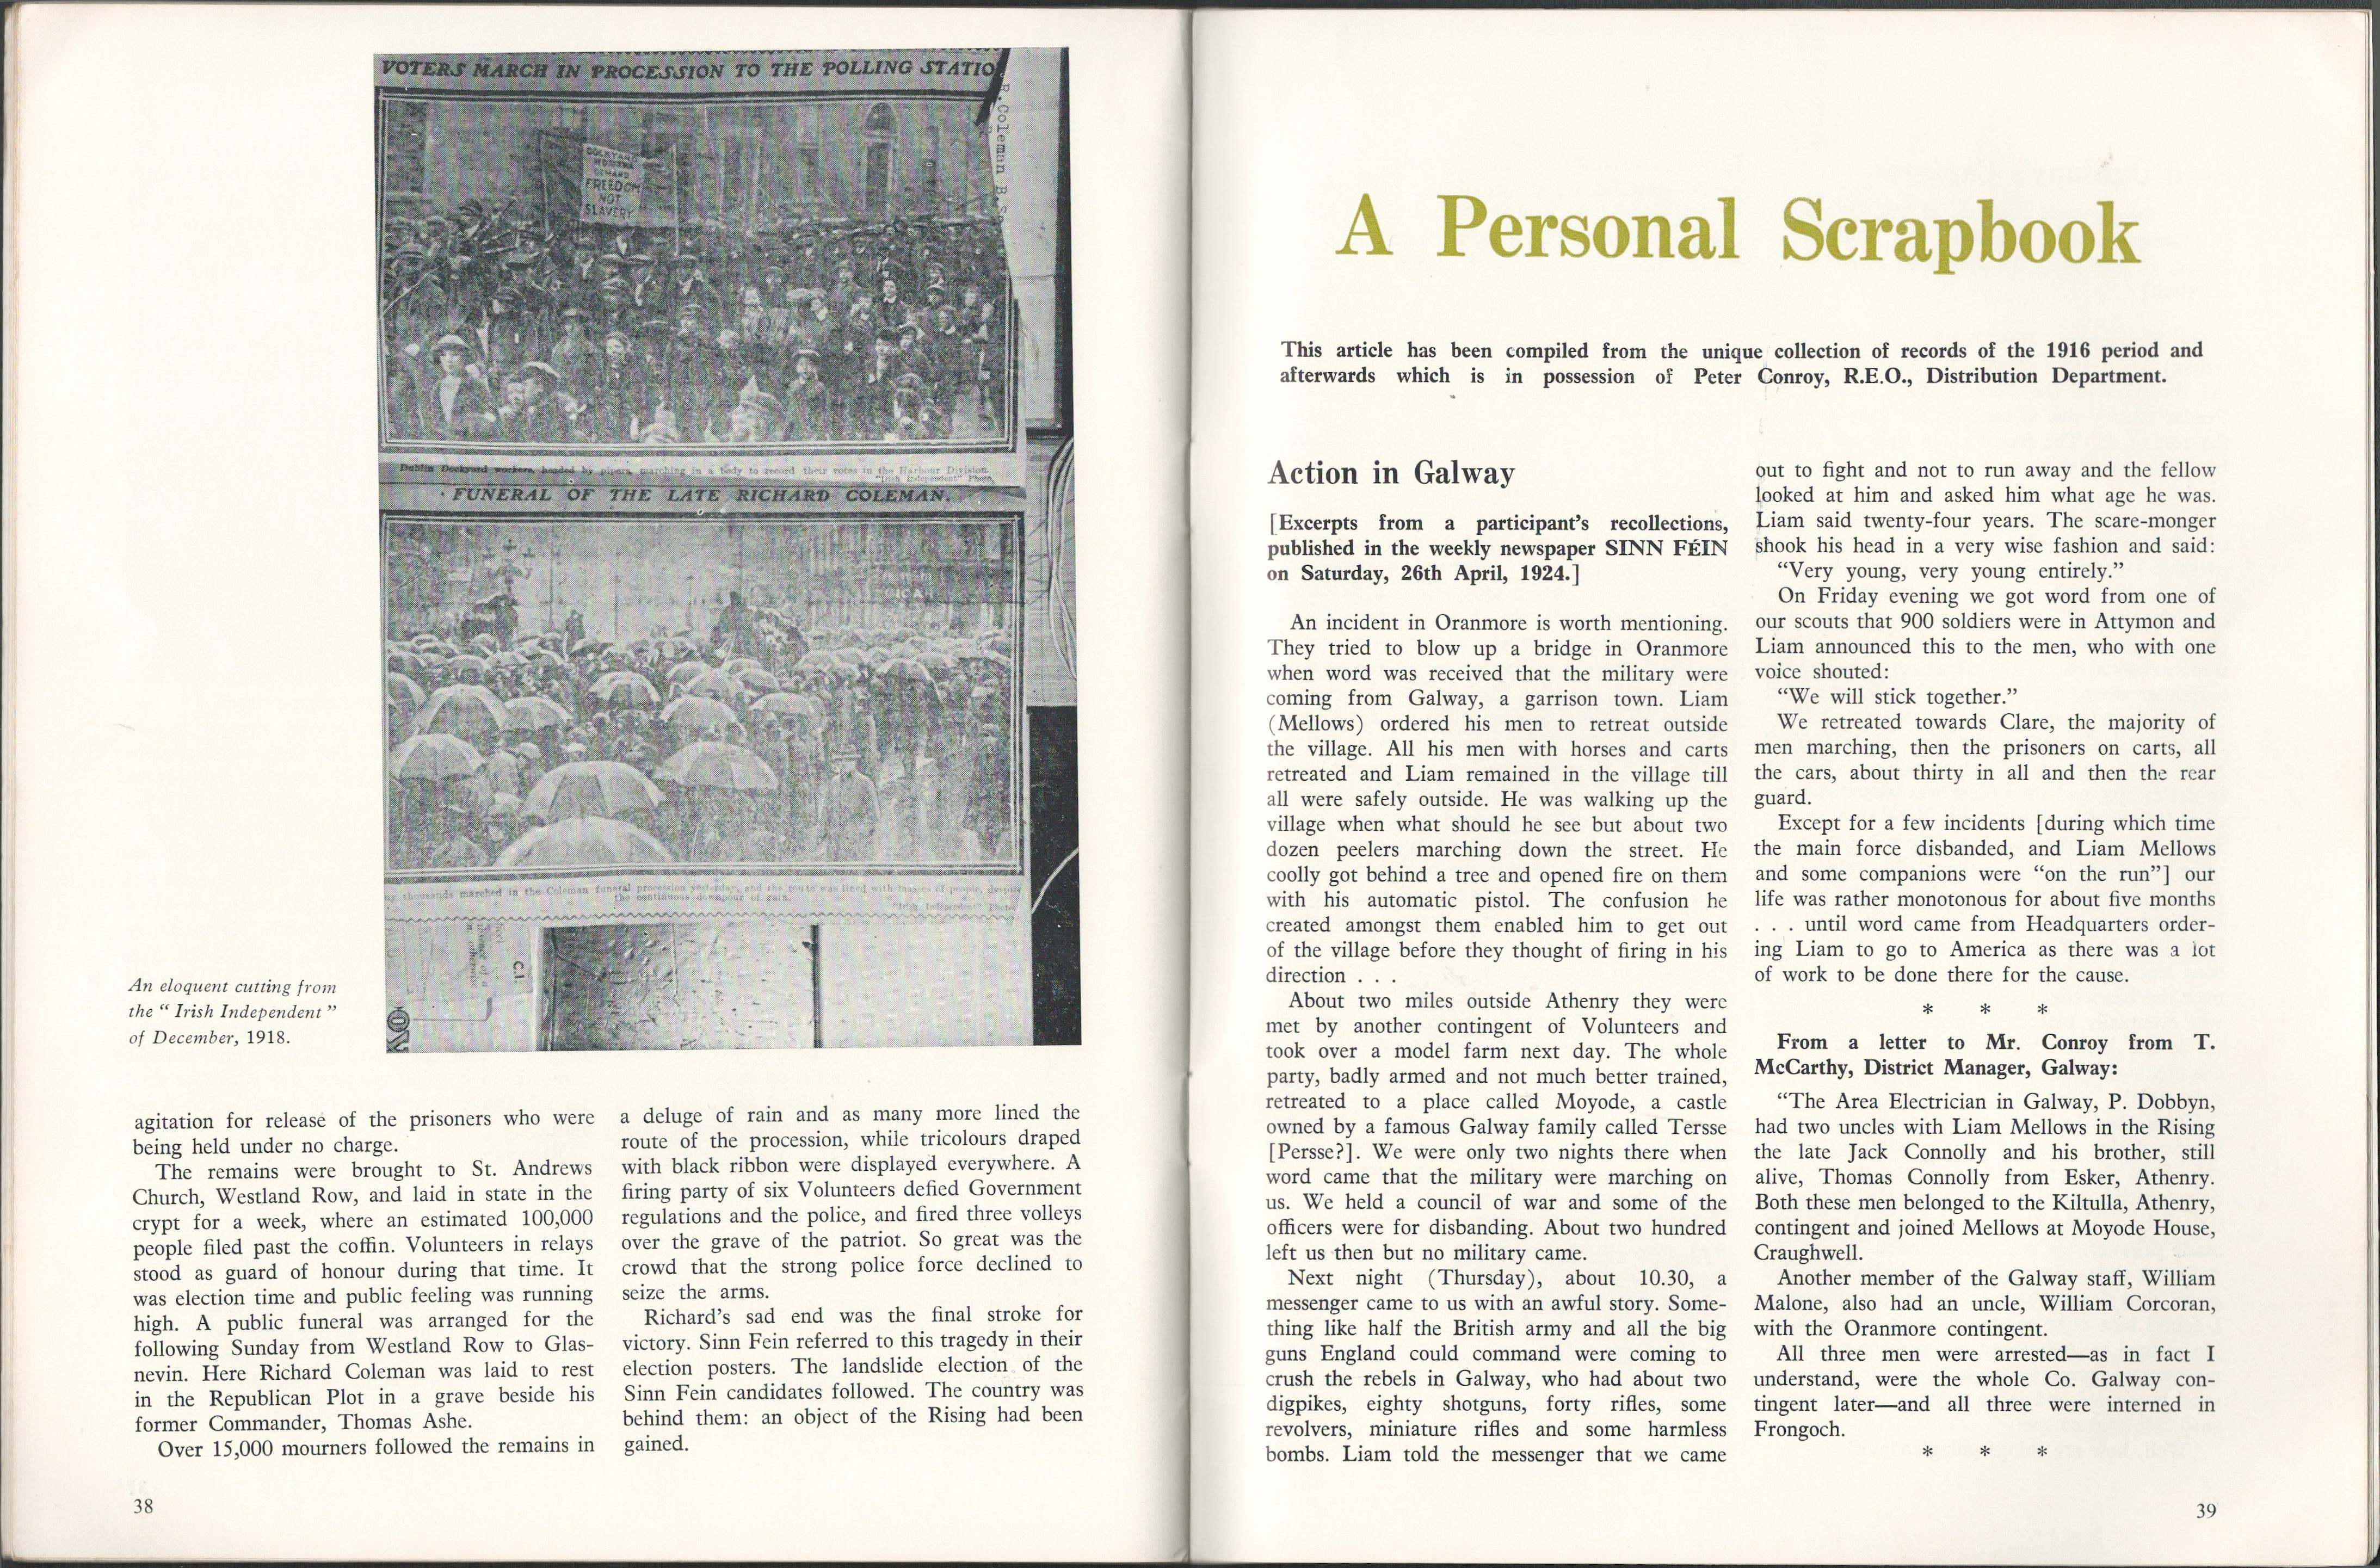 1966 Journal 50th Anniversary The Easter Rising 1916 - Image 6 of 9